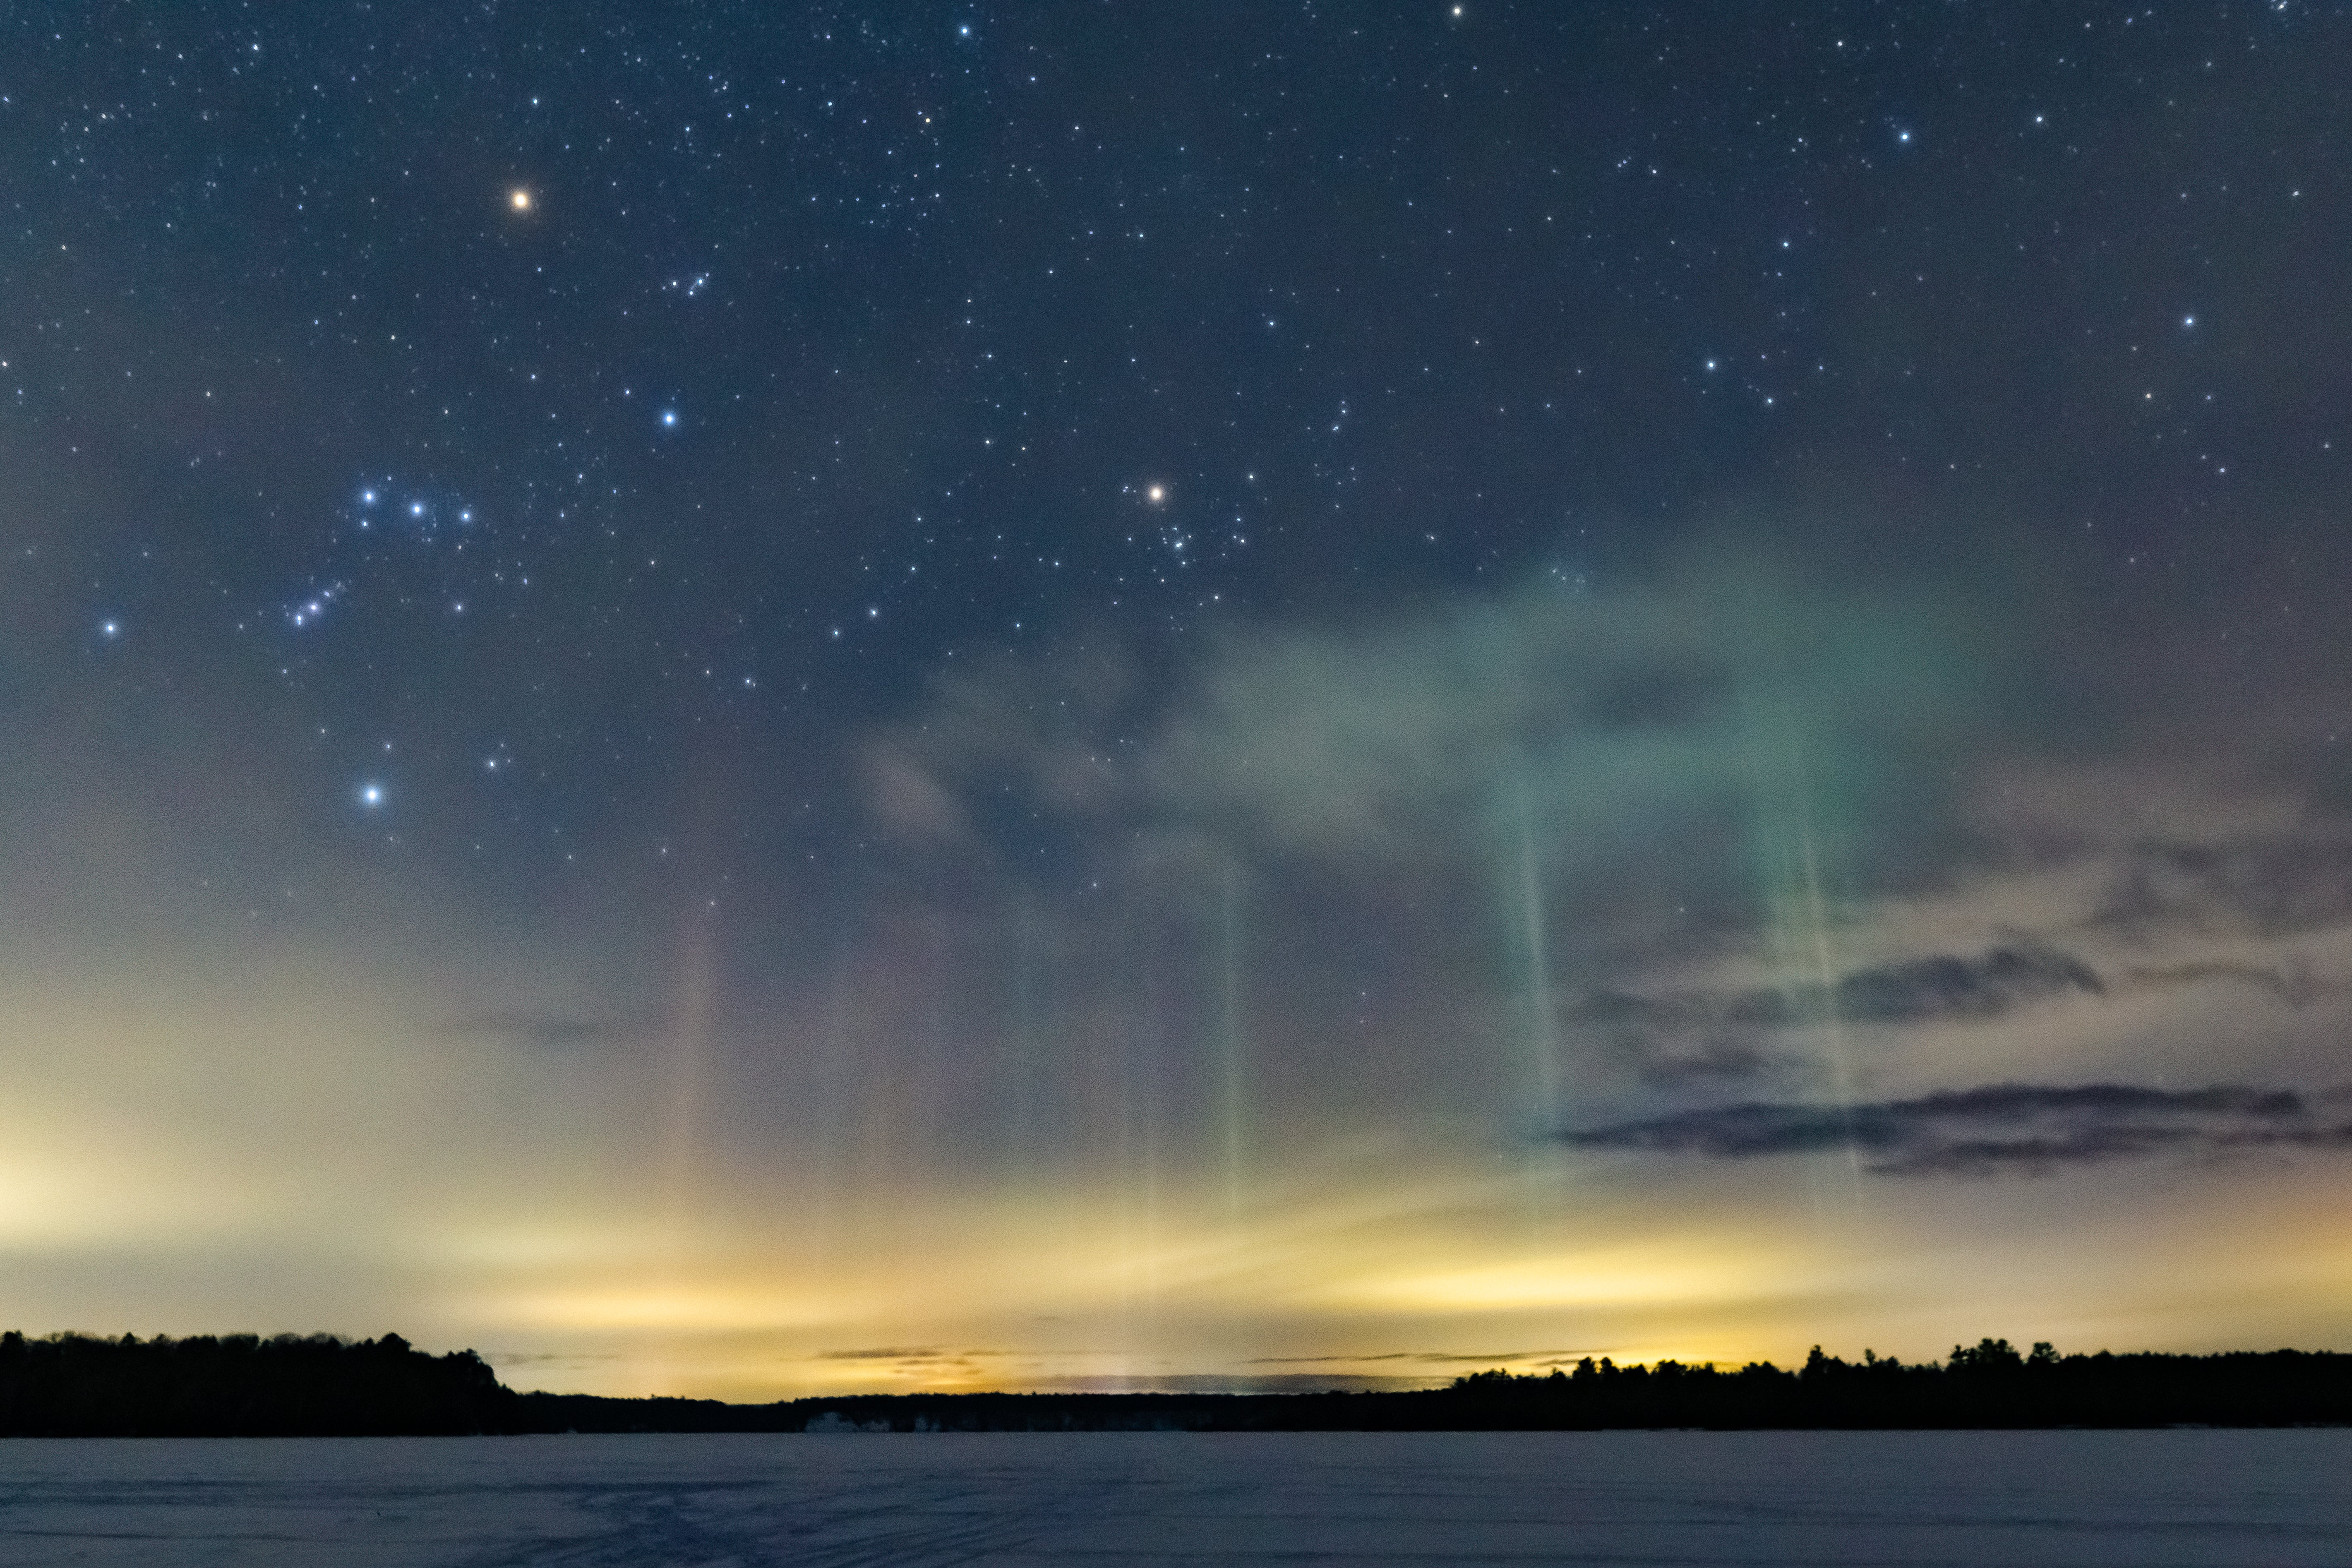 Light pillars appear in the winter sky above a nearby town in this winter scene in northern Michigan. The phenomenon is due to ice crystals in the atmosphere that reflect light. This 20-second exposure was taken with a Sony a6000 mirrorless camera and 16mm prime lens at f/2.5 and ISO 6400.